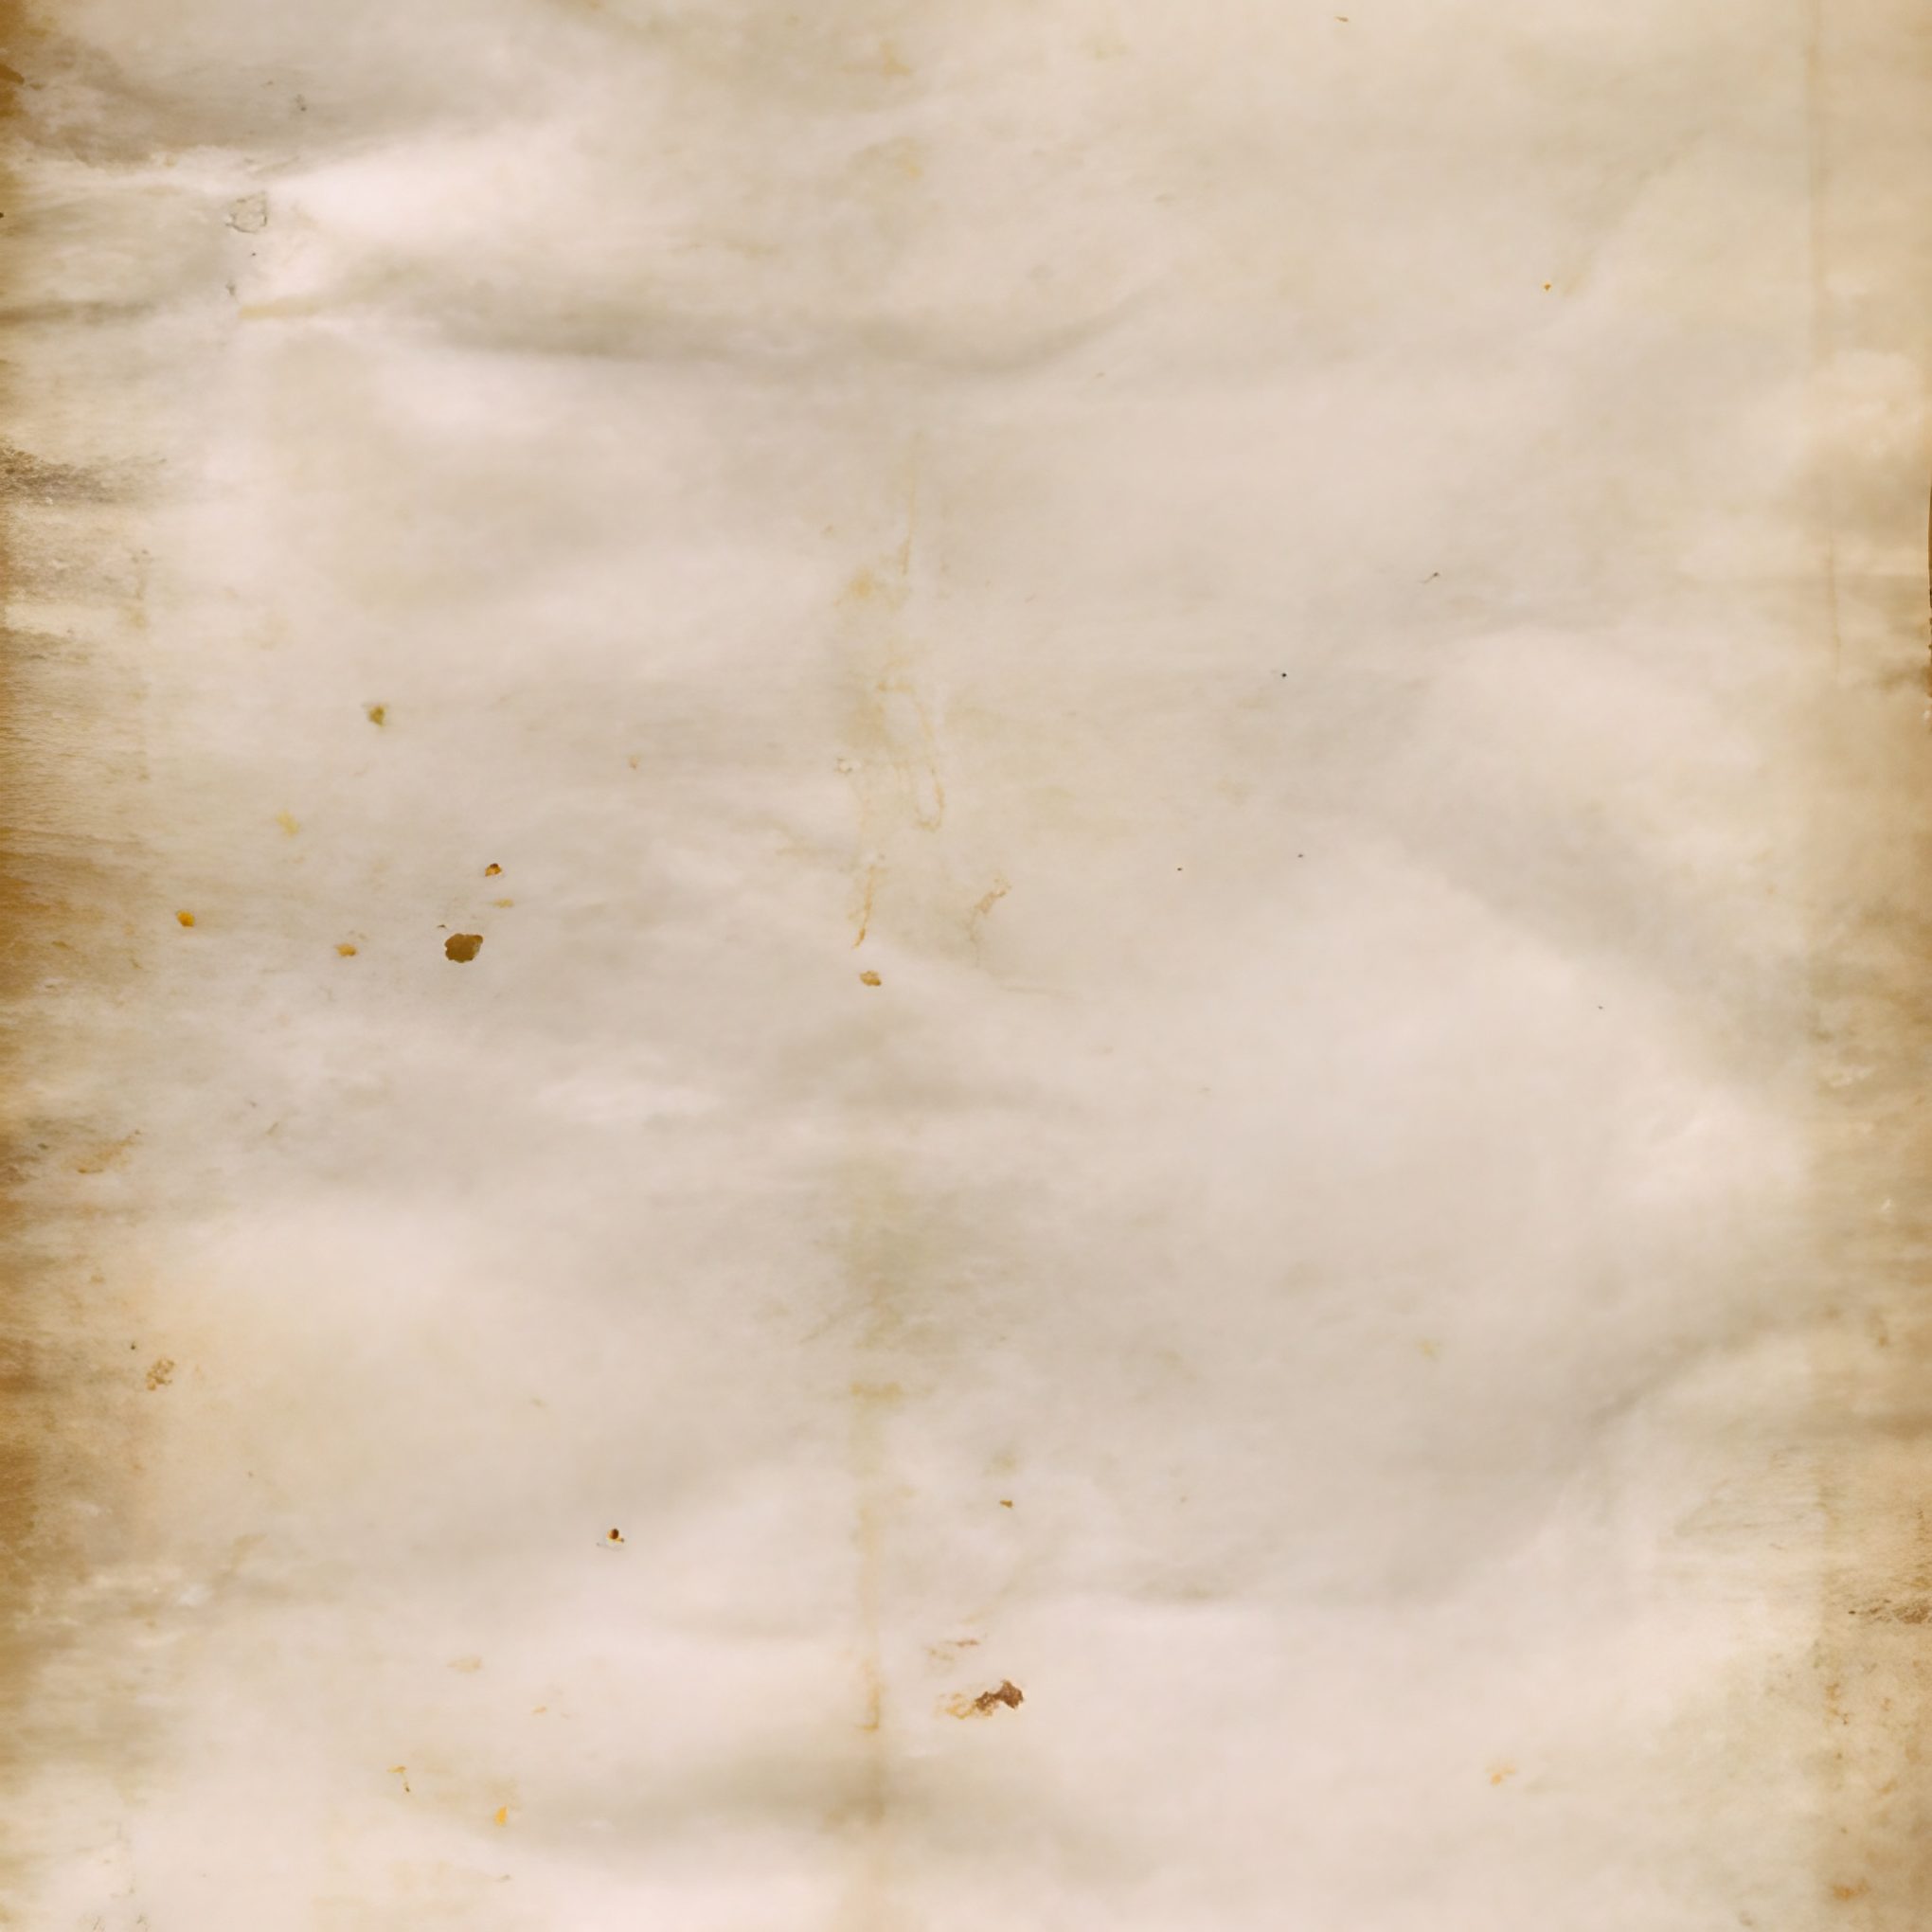 Vintage Stained Old Aged Paper Page Free Stock Photo